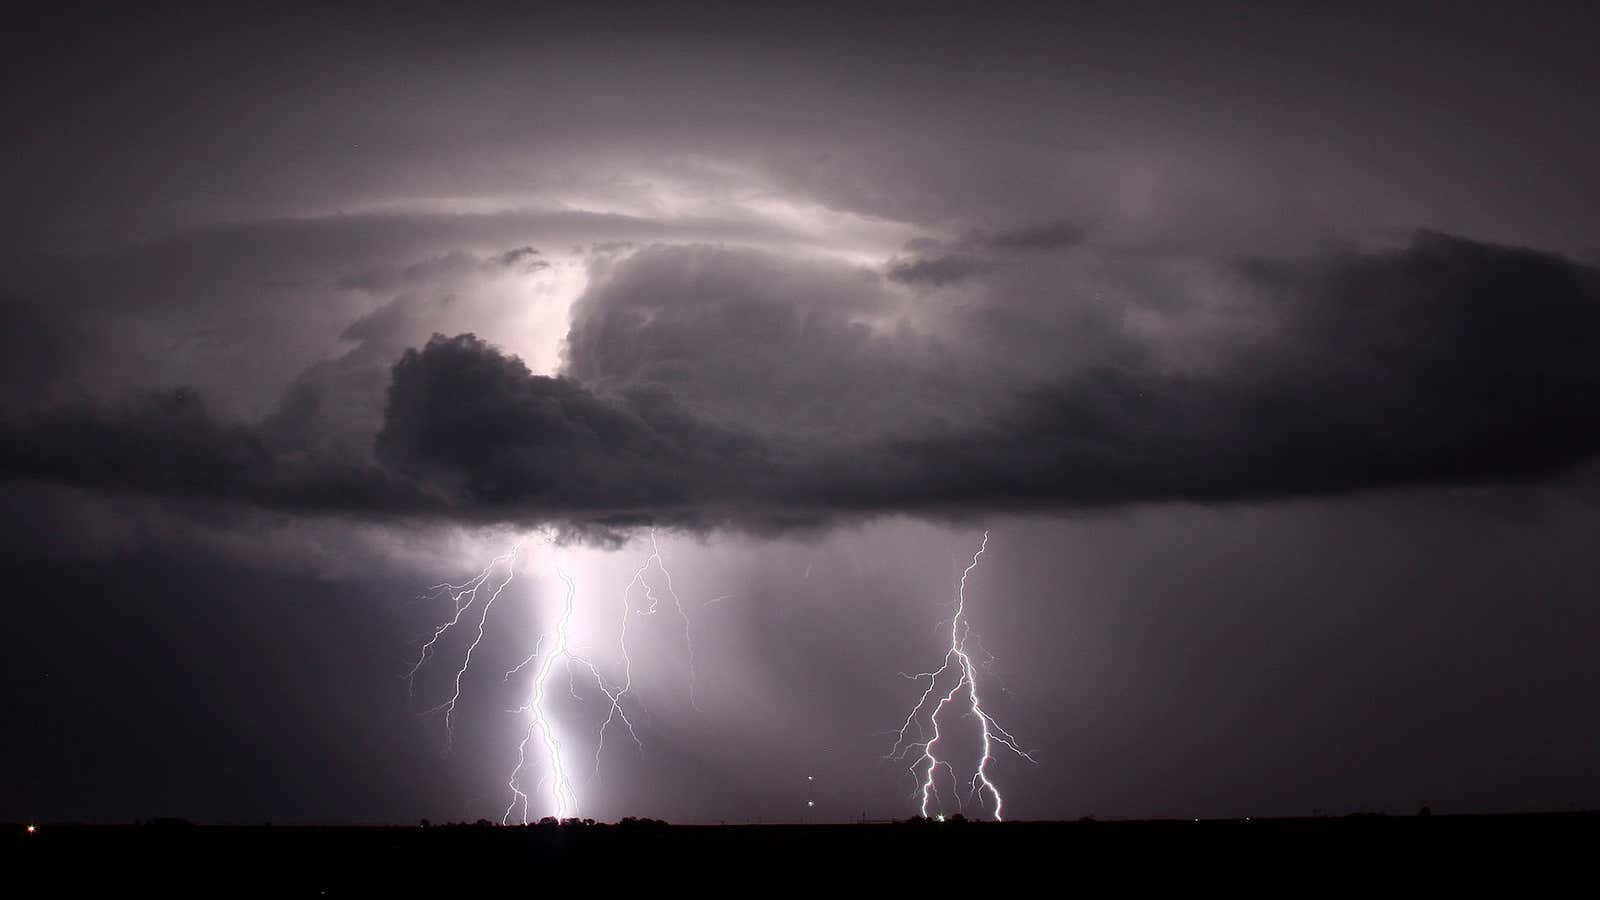 Lightning lights up the night sky over Plainview, Texas, late May 6, 2008, as more severe storms and possible tornados are forecasted for the next few days.  REUTERS/Gene Blevins (UNITED STATES) – GM1E45717GP01